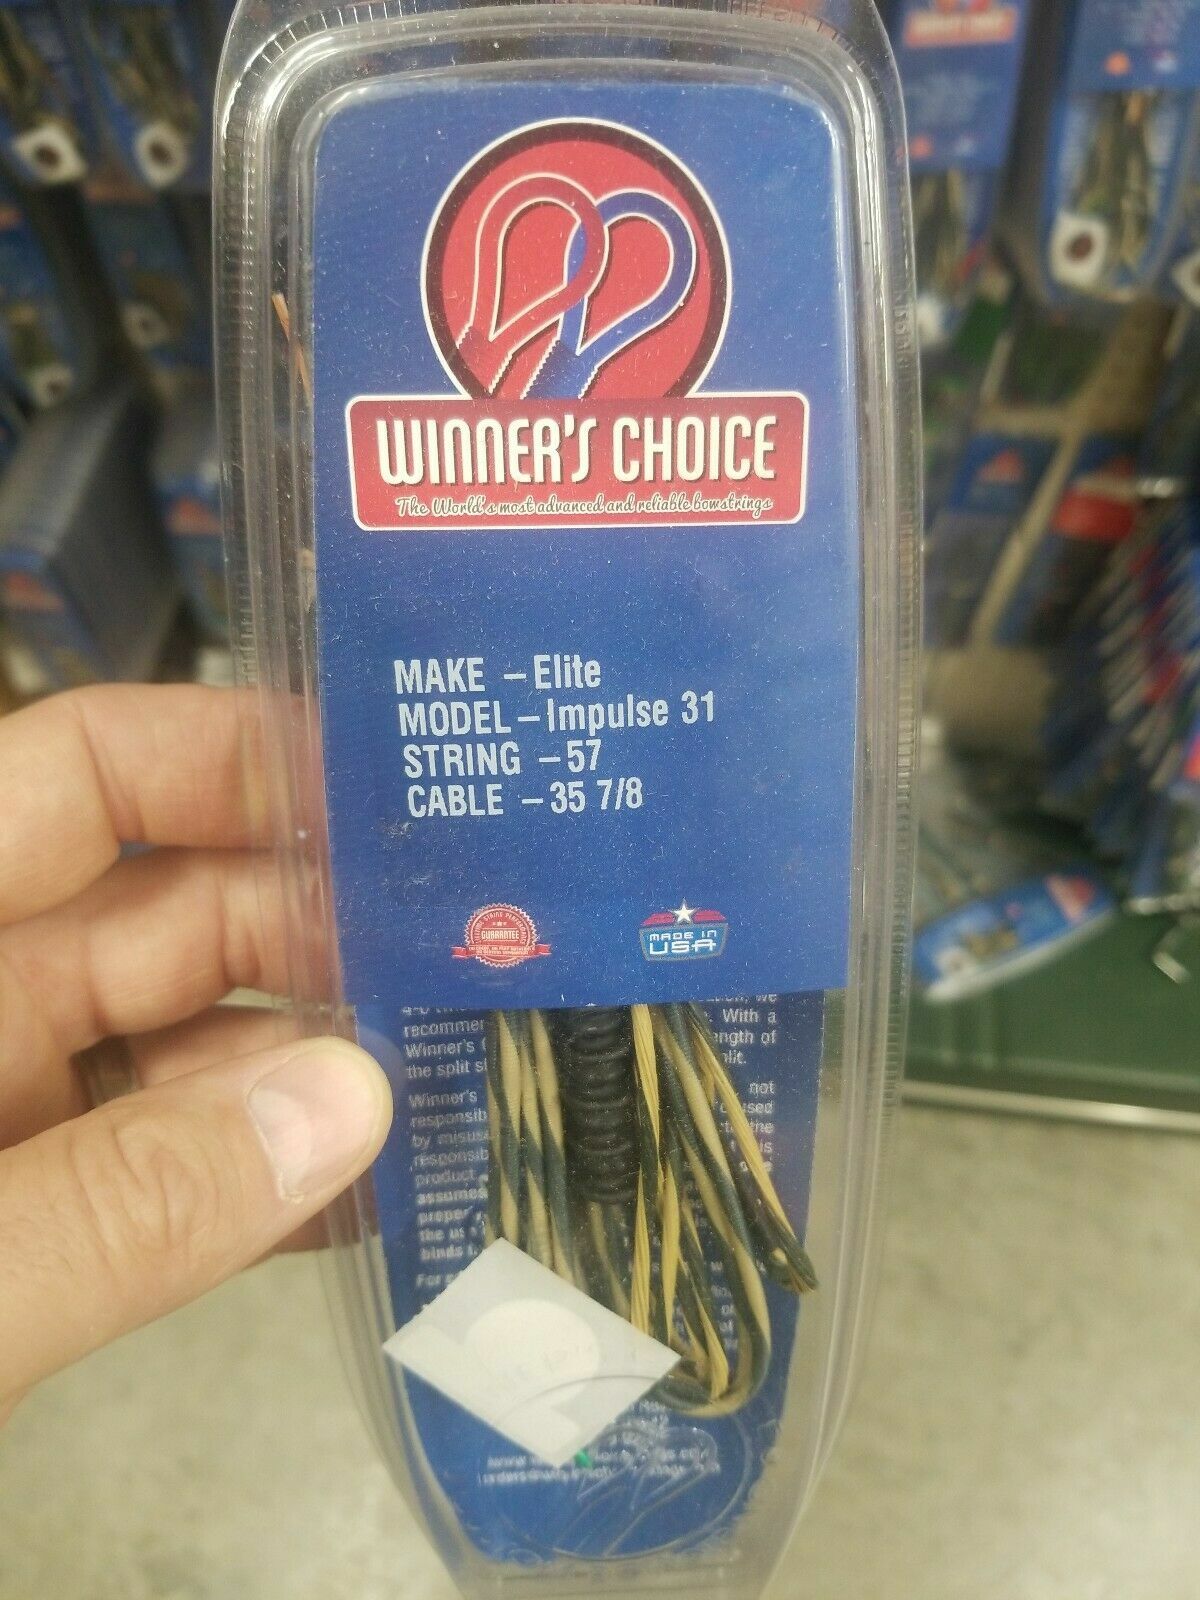 Winners Choice String & Cable for Elite Impulse 31